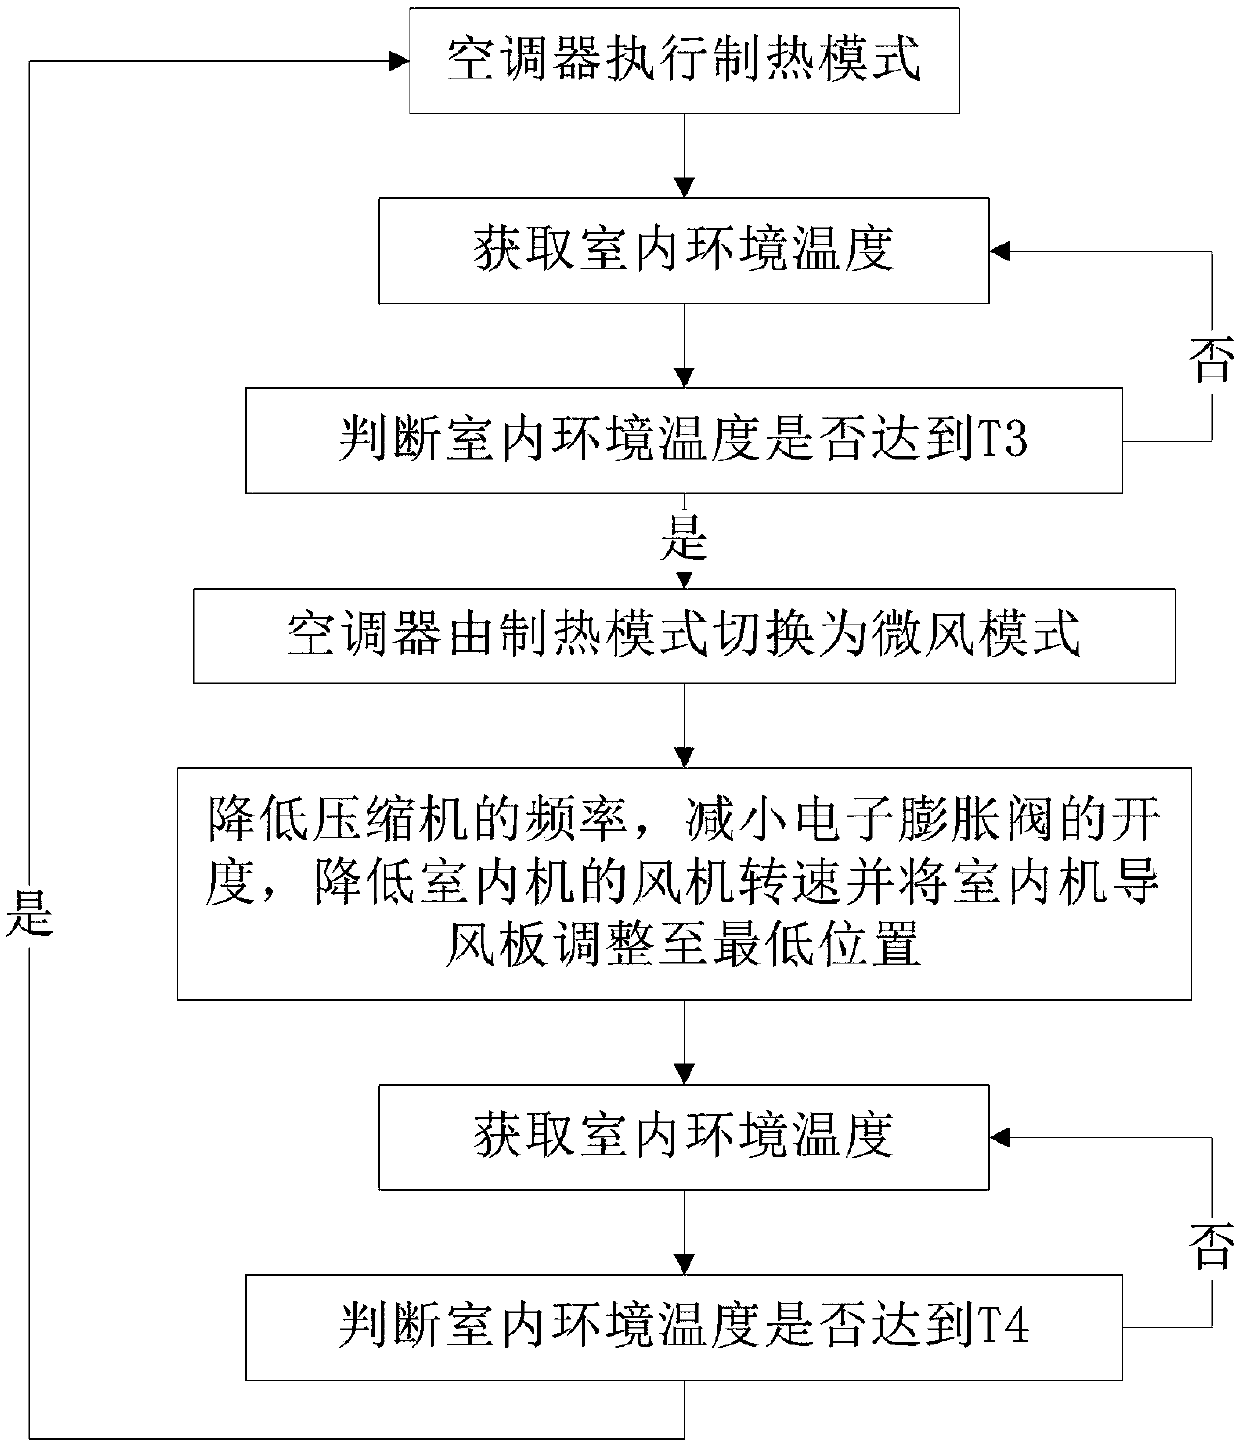 Control method used for air conditioner, and air conditioner